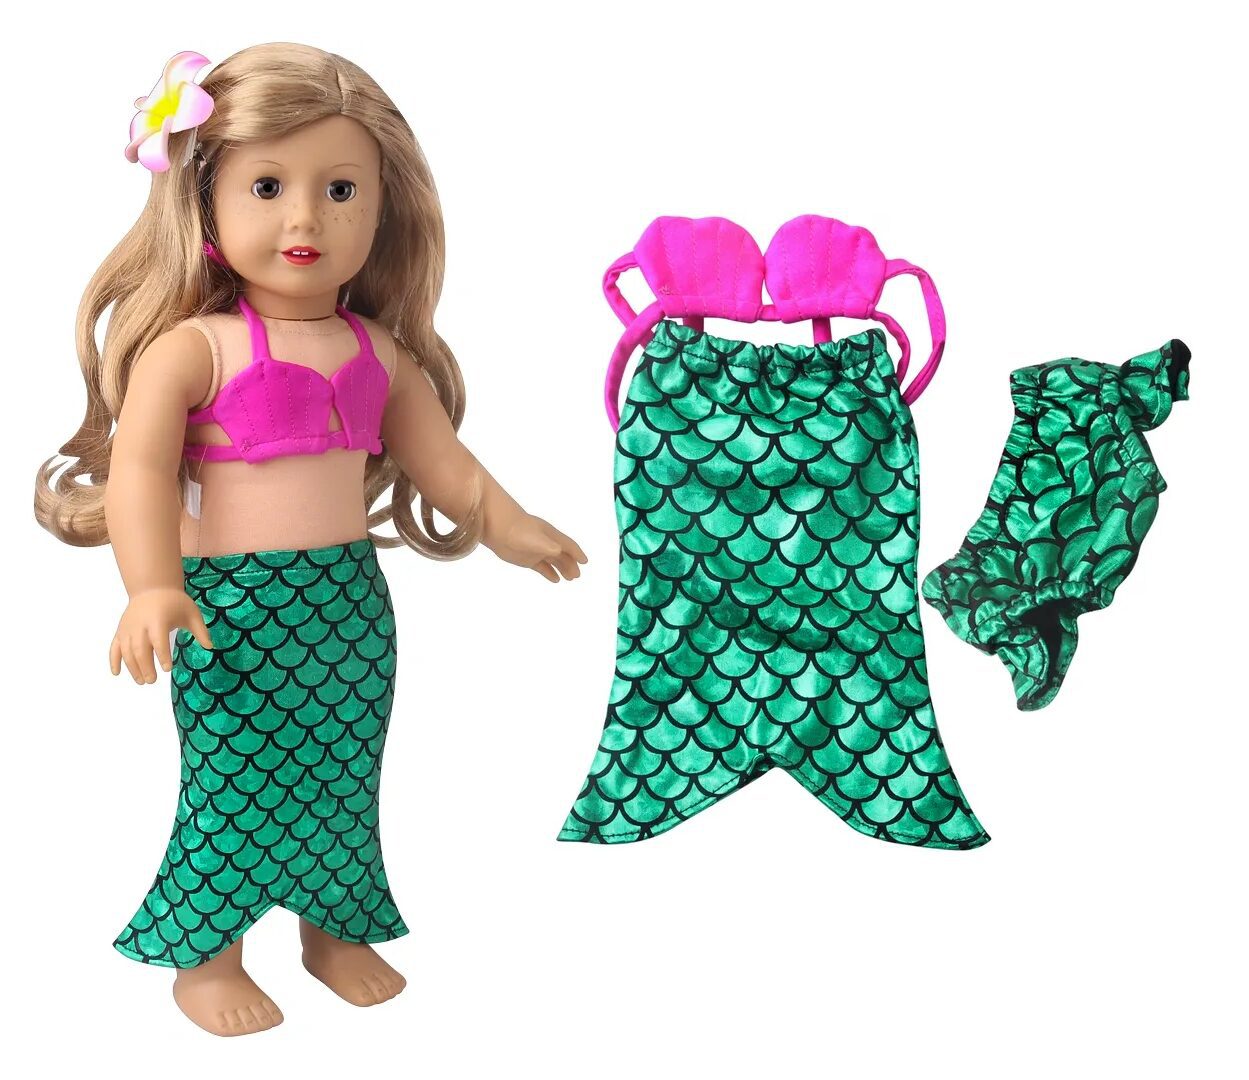 18 inch doll mermaid outfit.